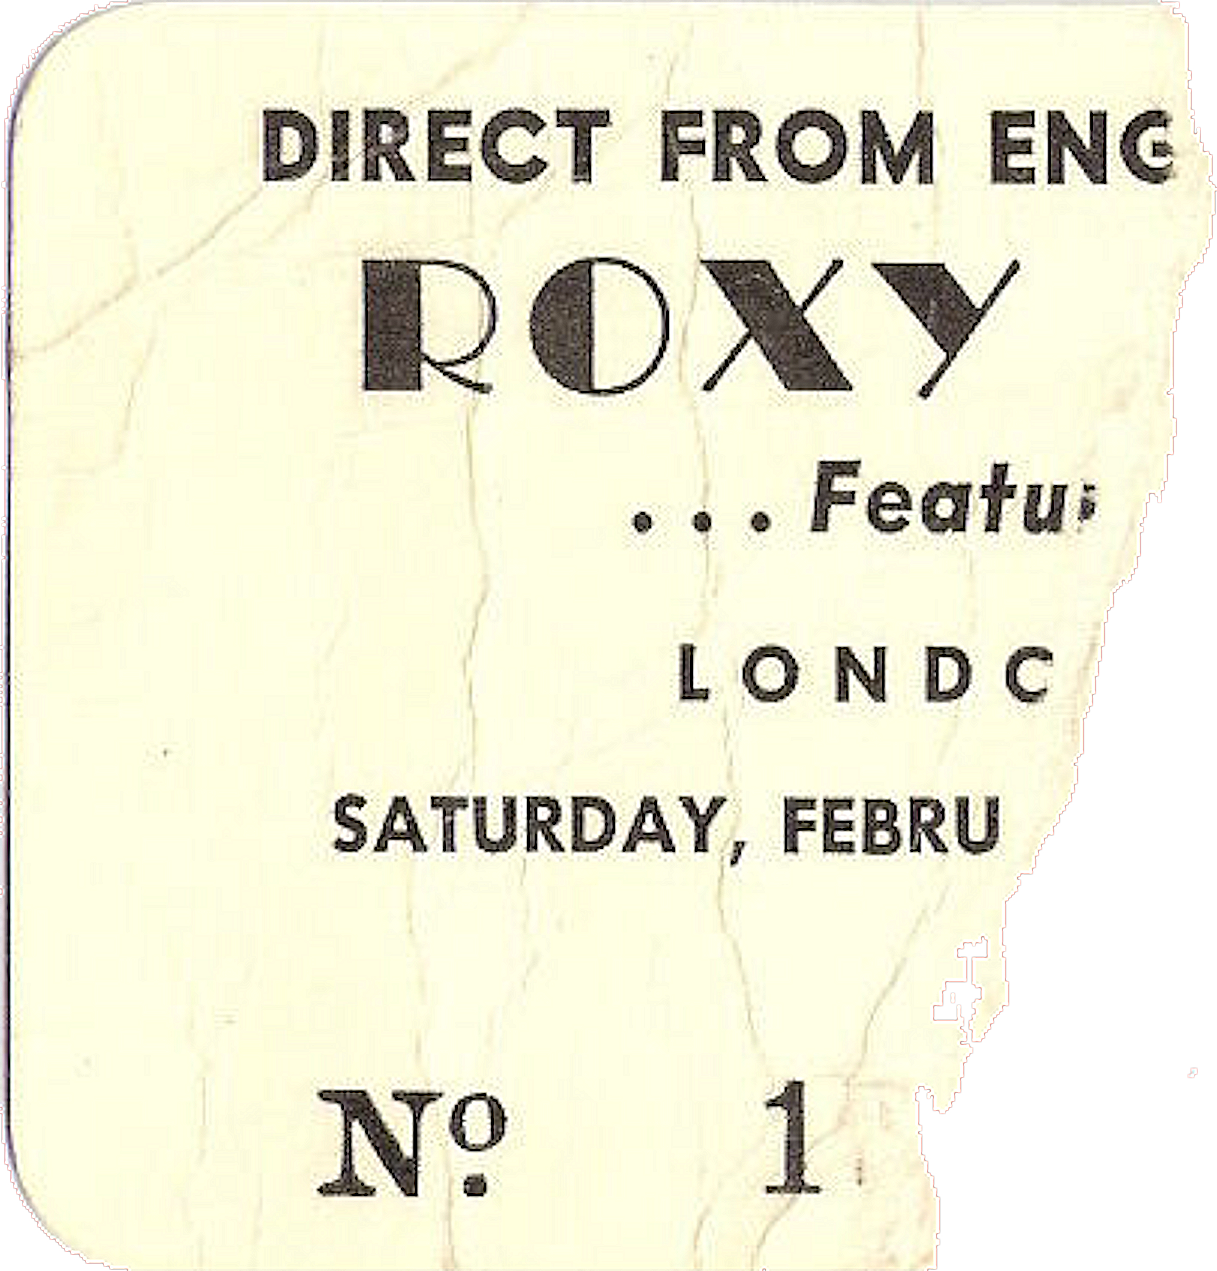 Roxy Music with Devotion, London, February 8, 1975, London Arena, London, Ontario, Canada, Ticket, mylifeinconcert.com, Episode 2, Concert Number 1